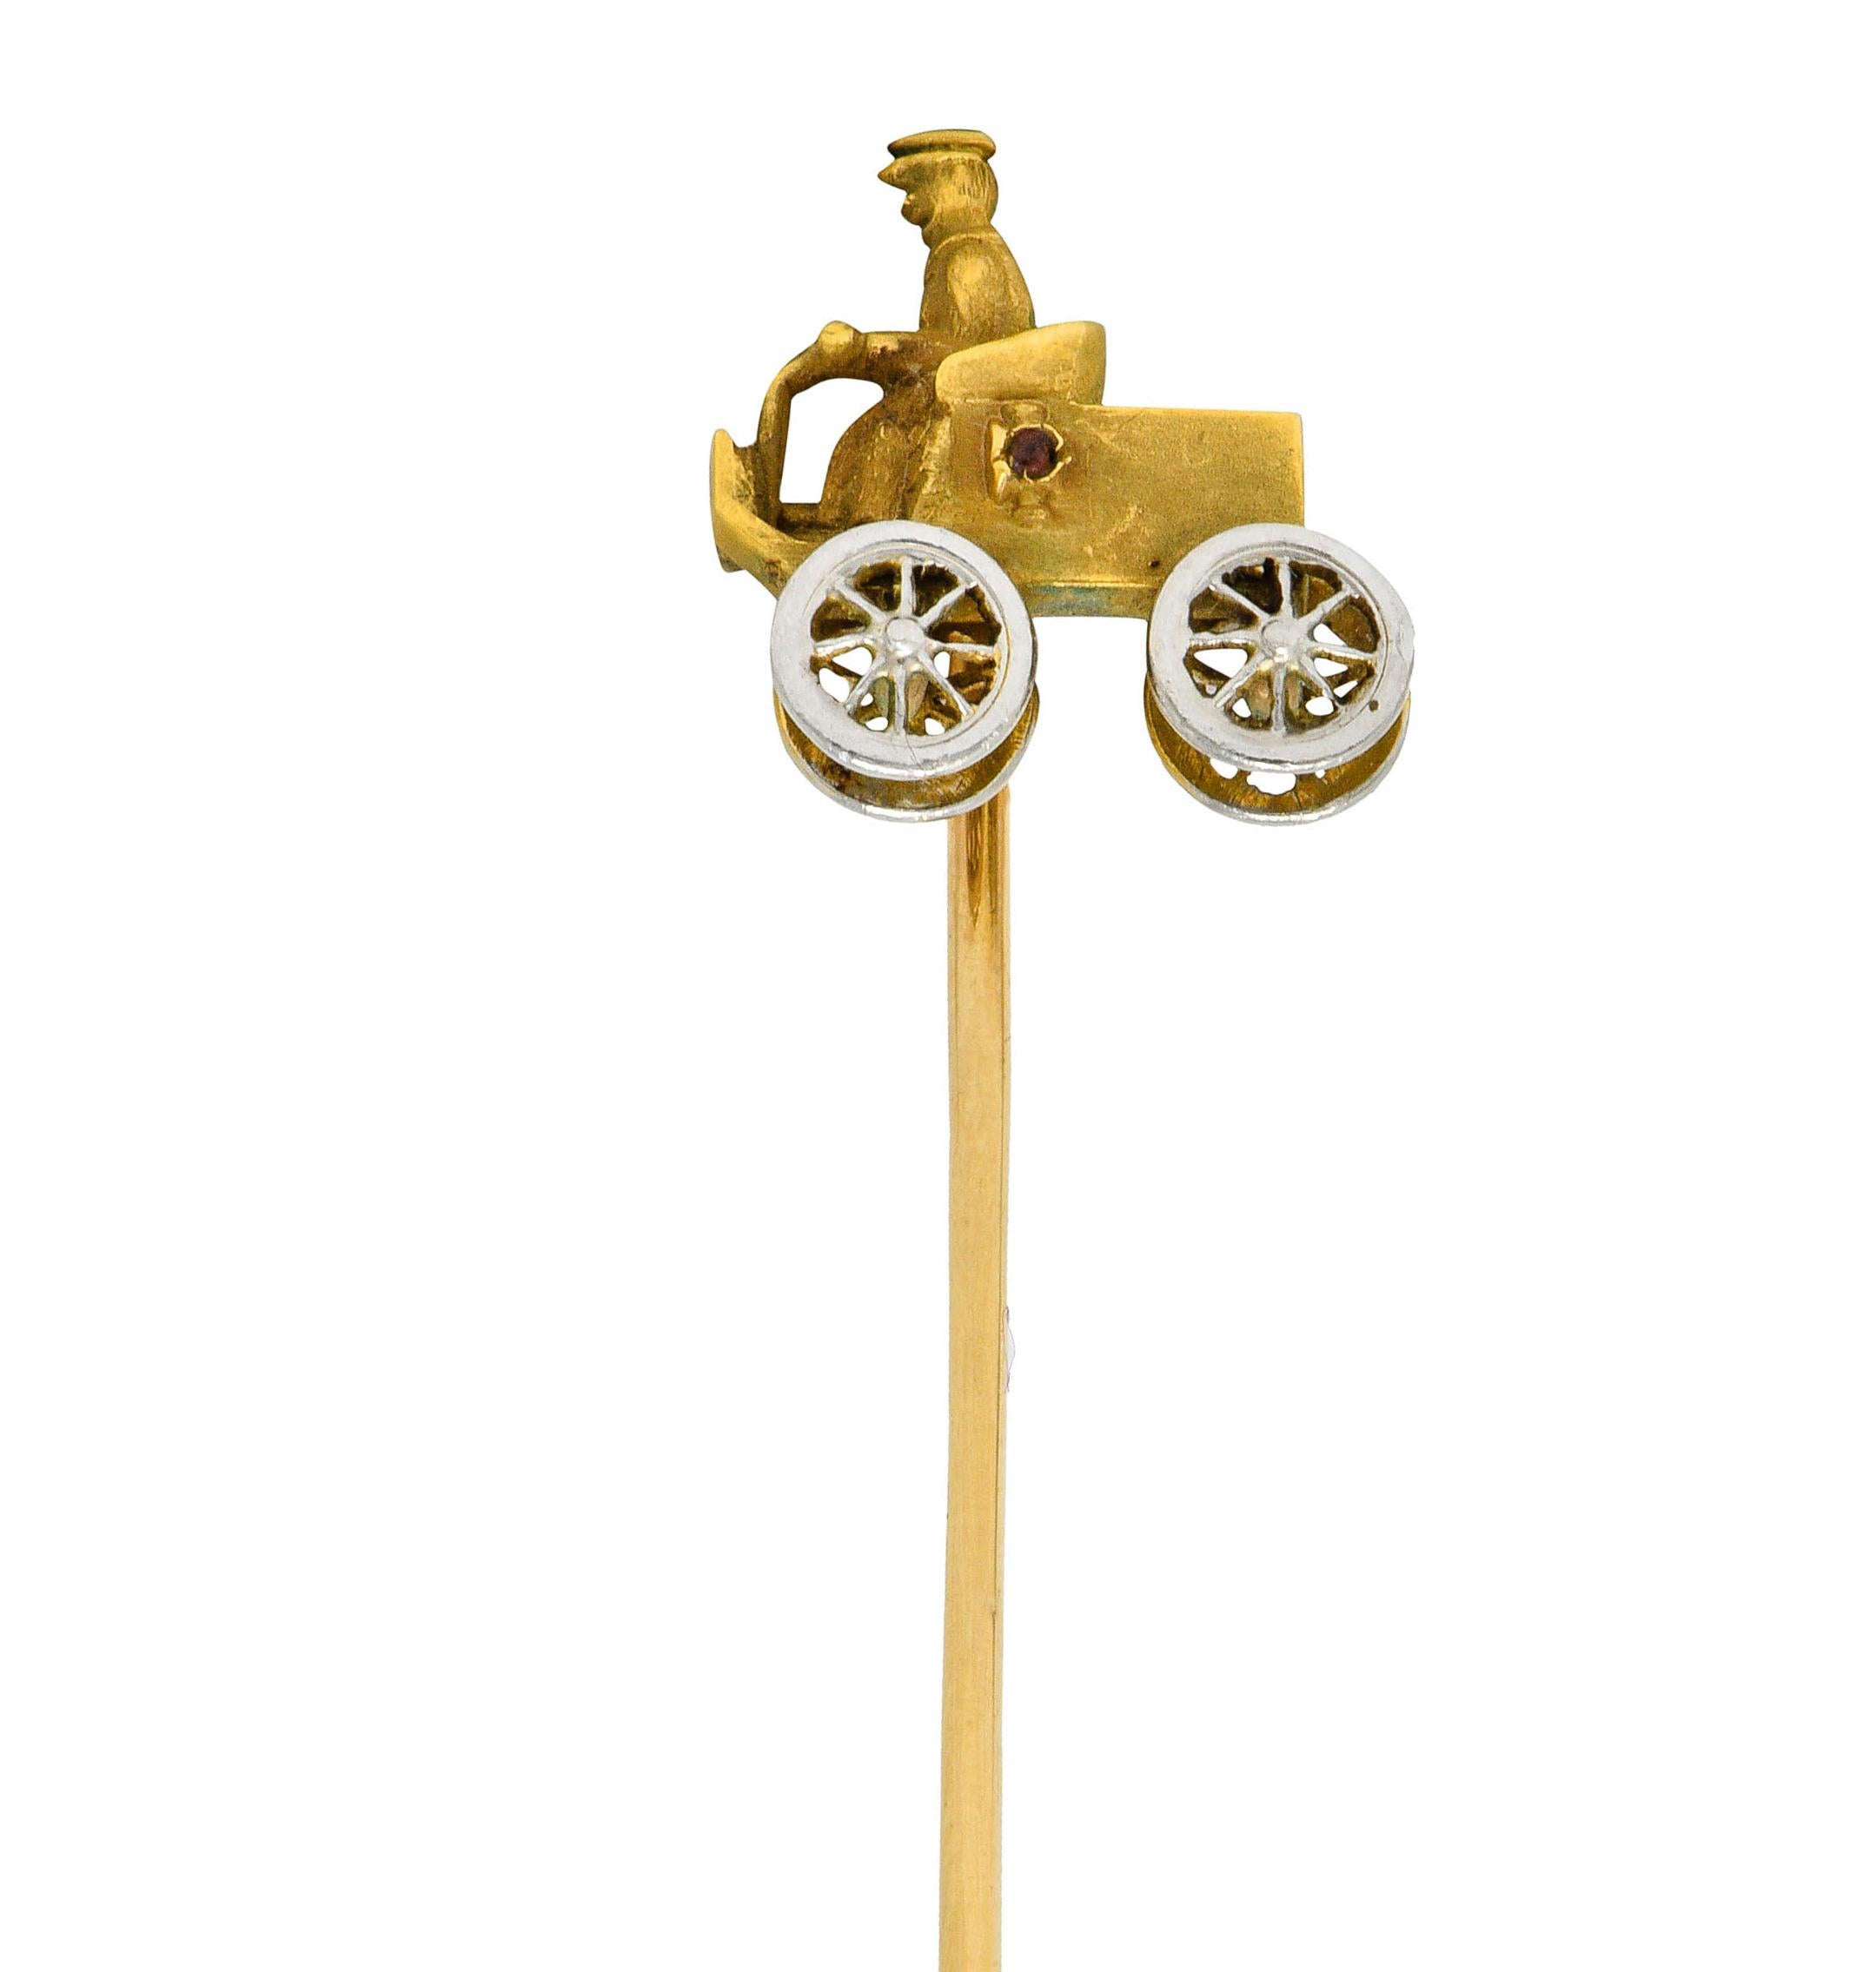 Designed as an antique car with a highly rendered driver

With platinum-topped spoked wheels

And a red gemstone cabochon accent

Tested as platinum-topped 14 karat gold

Circa: 1900

Car measures: 1/2 x 9/16 inch

Total length: 3 1/16 inches

Total